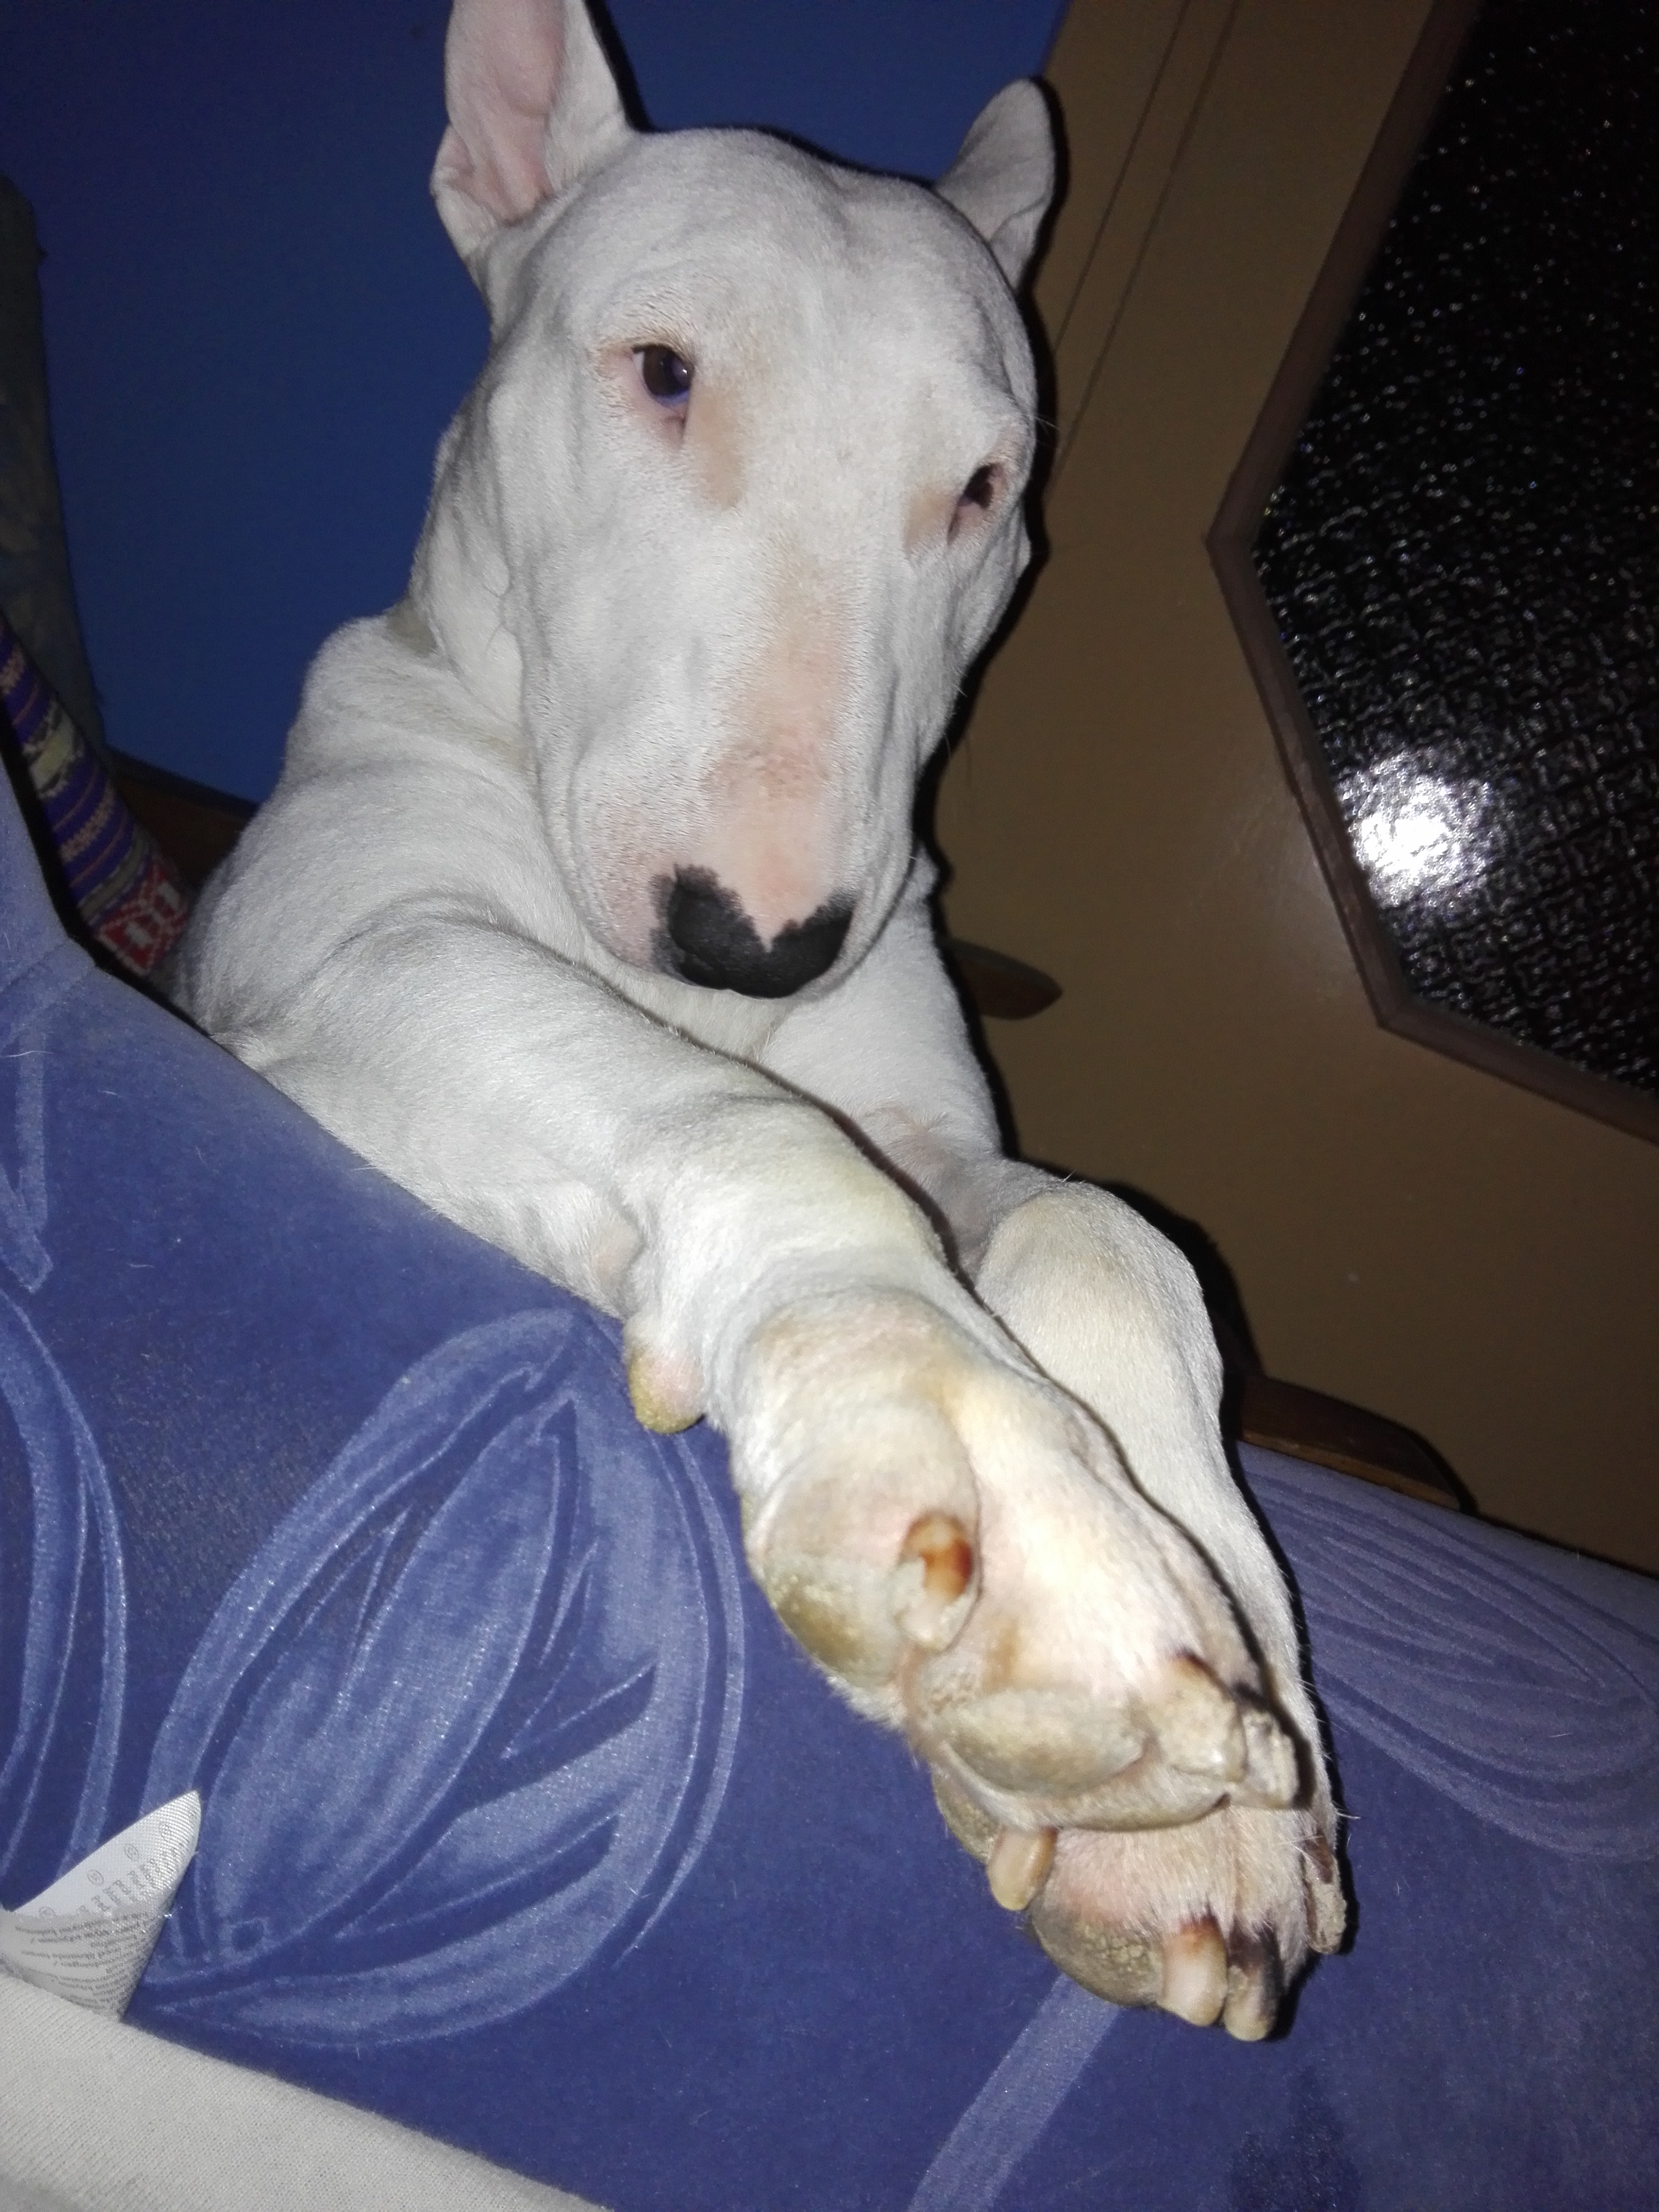 An English Bull Terrier lying on the bed